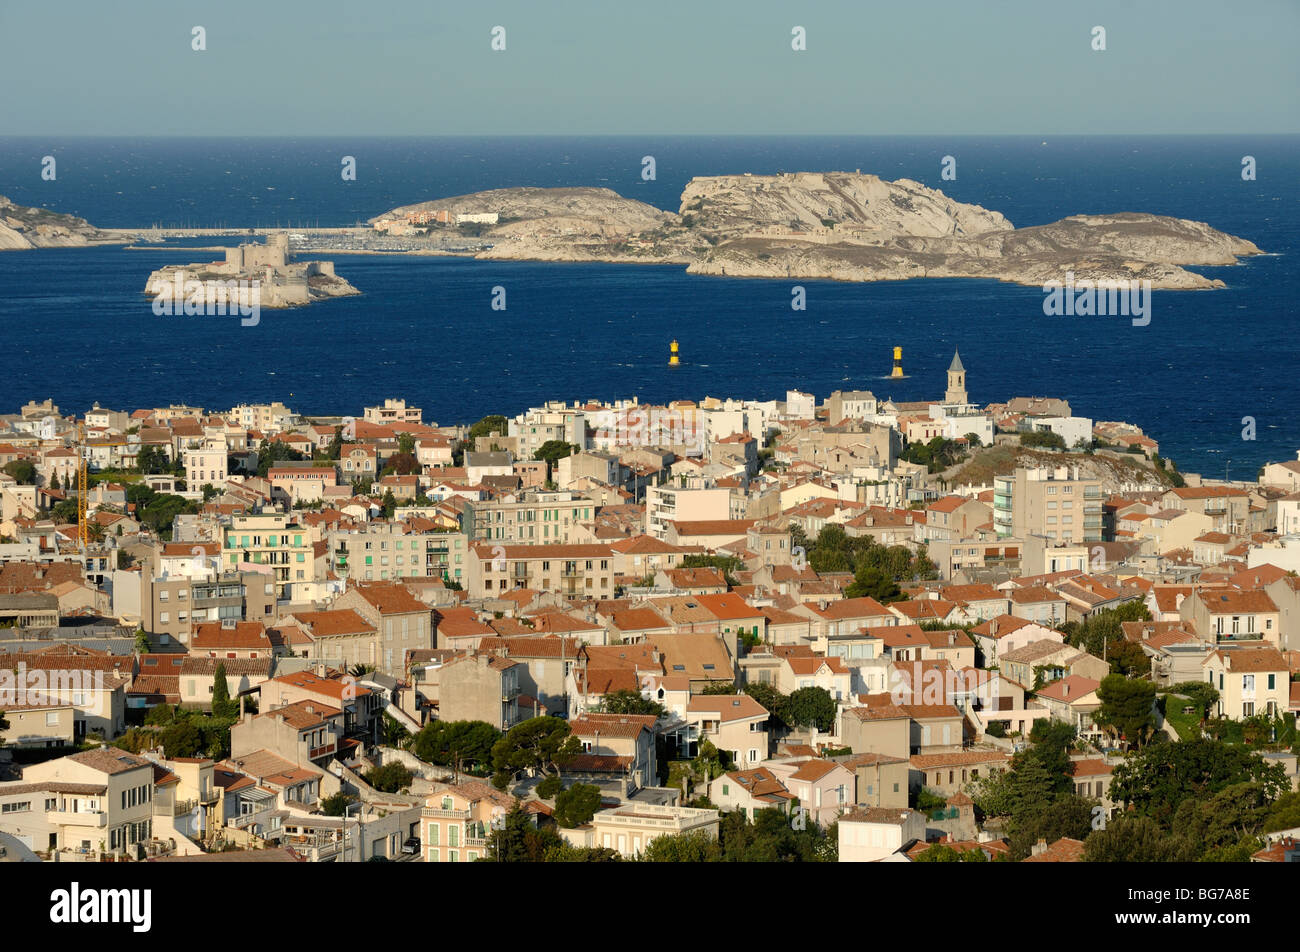 Panorama or Panoramic View over Frioul Islands or Archipelago, Endoume District & Marseille Bay Mediterranean, Marseille Provence France Stock Photo